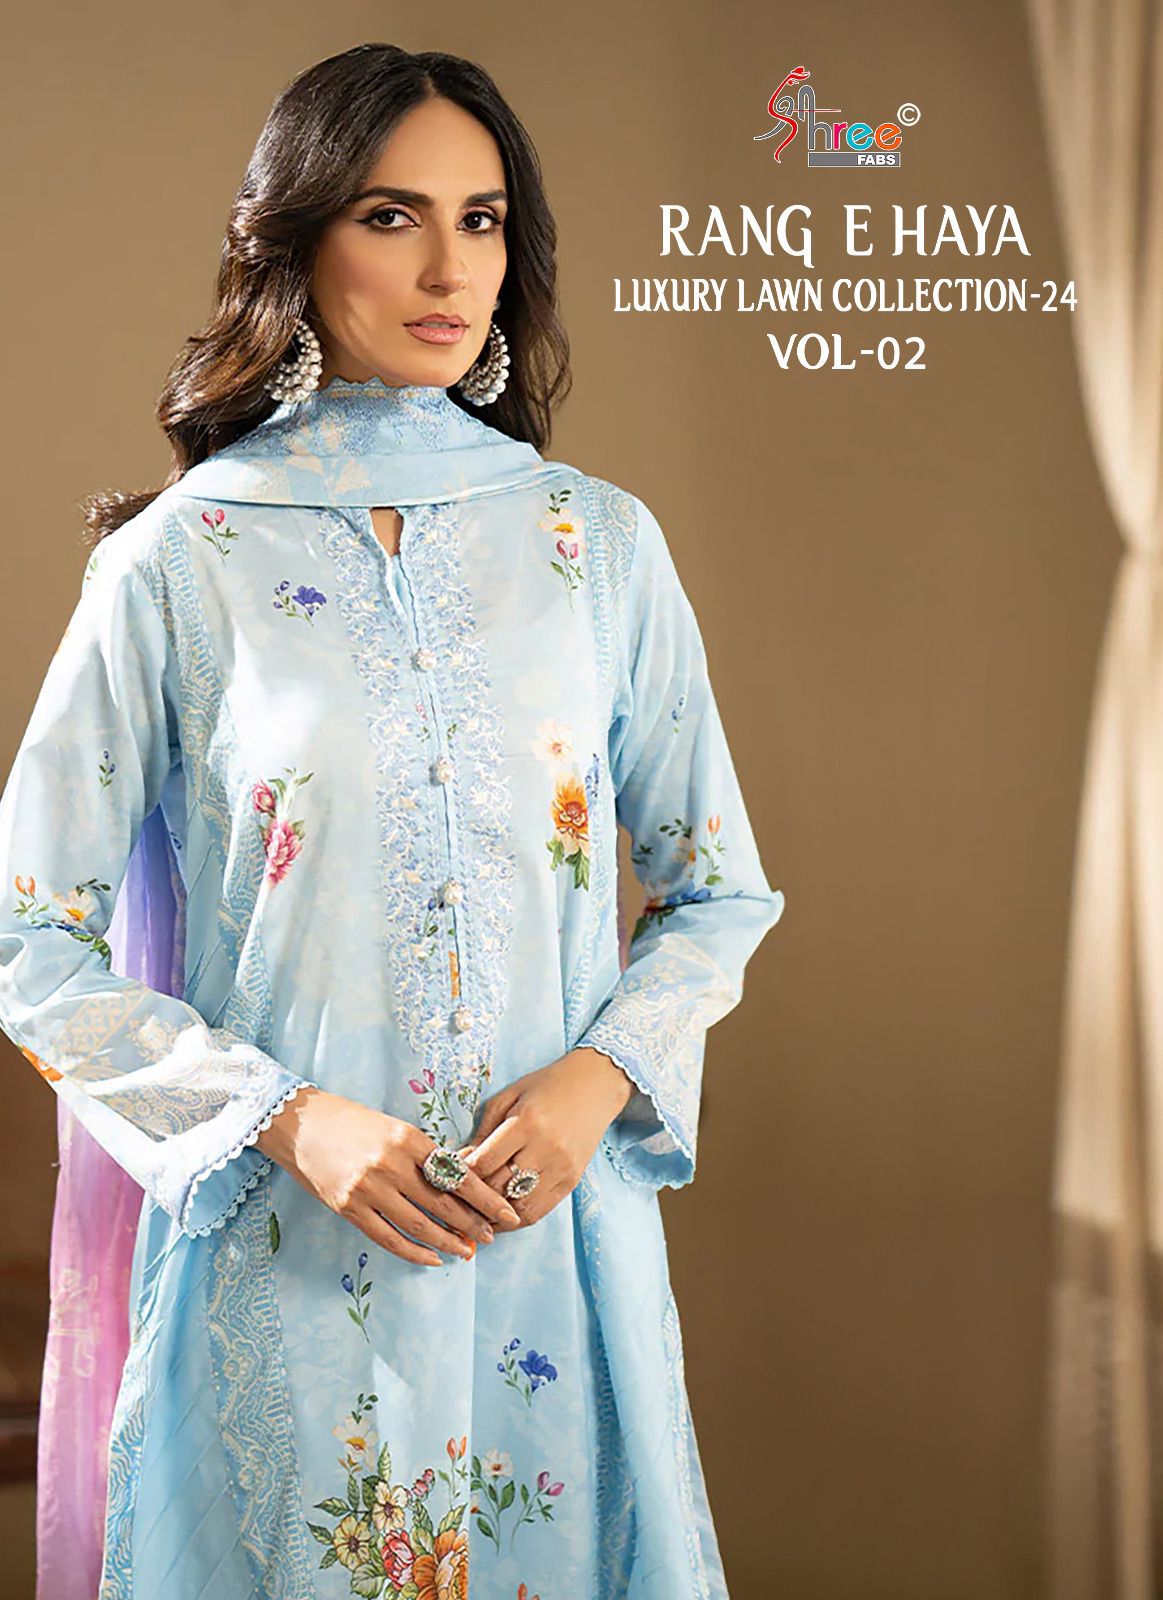 SHREE FABS RANG E HAYA LAWN COLLECTION 24 VOL 2 SALWAR SUIT SUPPLIER IN SURAT